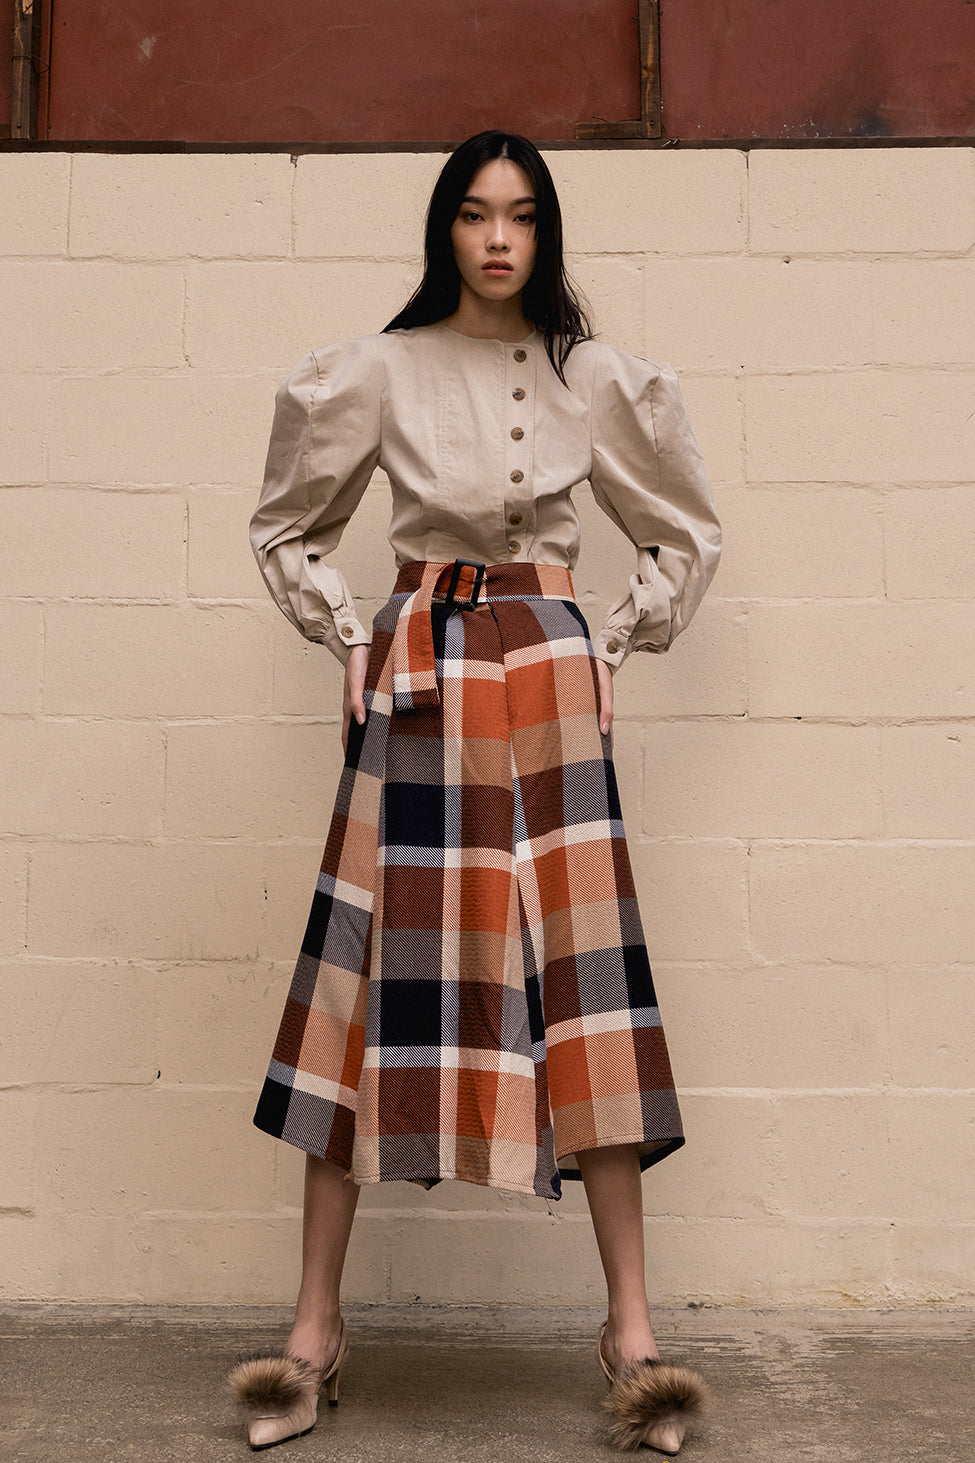 The Charron skirt featuring high rise, thick belted detail with large square ring. A-line silhouette. Concealed zip closure along side. Unlined. Mid-length. 